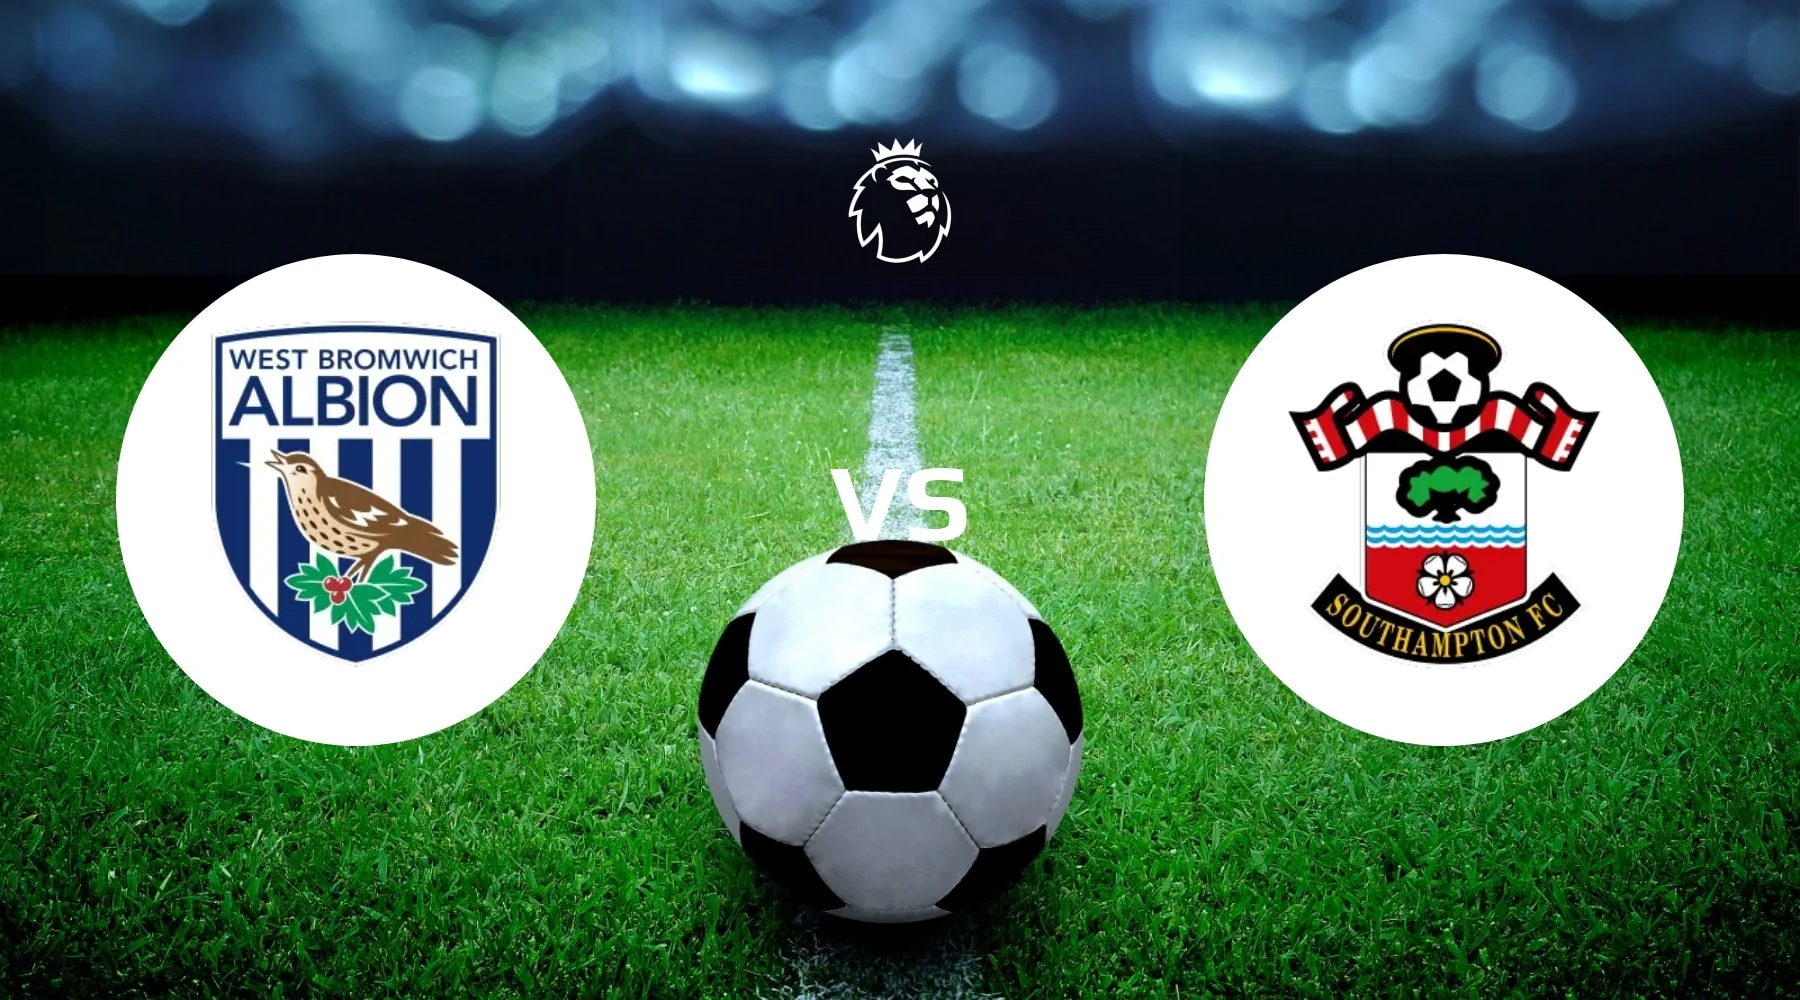 West Bromwich Albion vs Southampton Betting Tips & Prediction